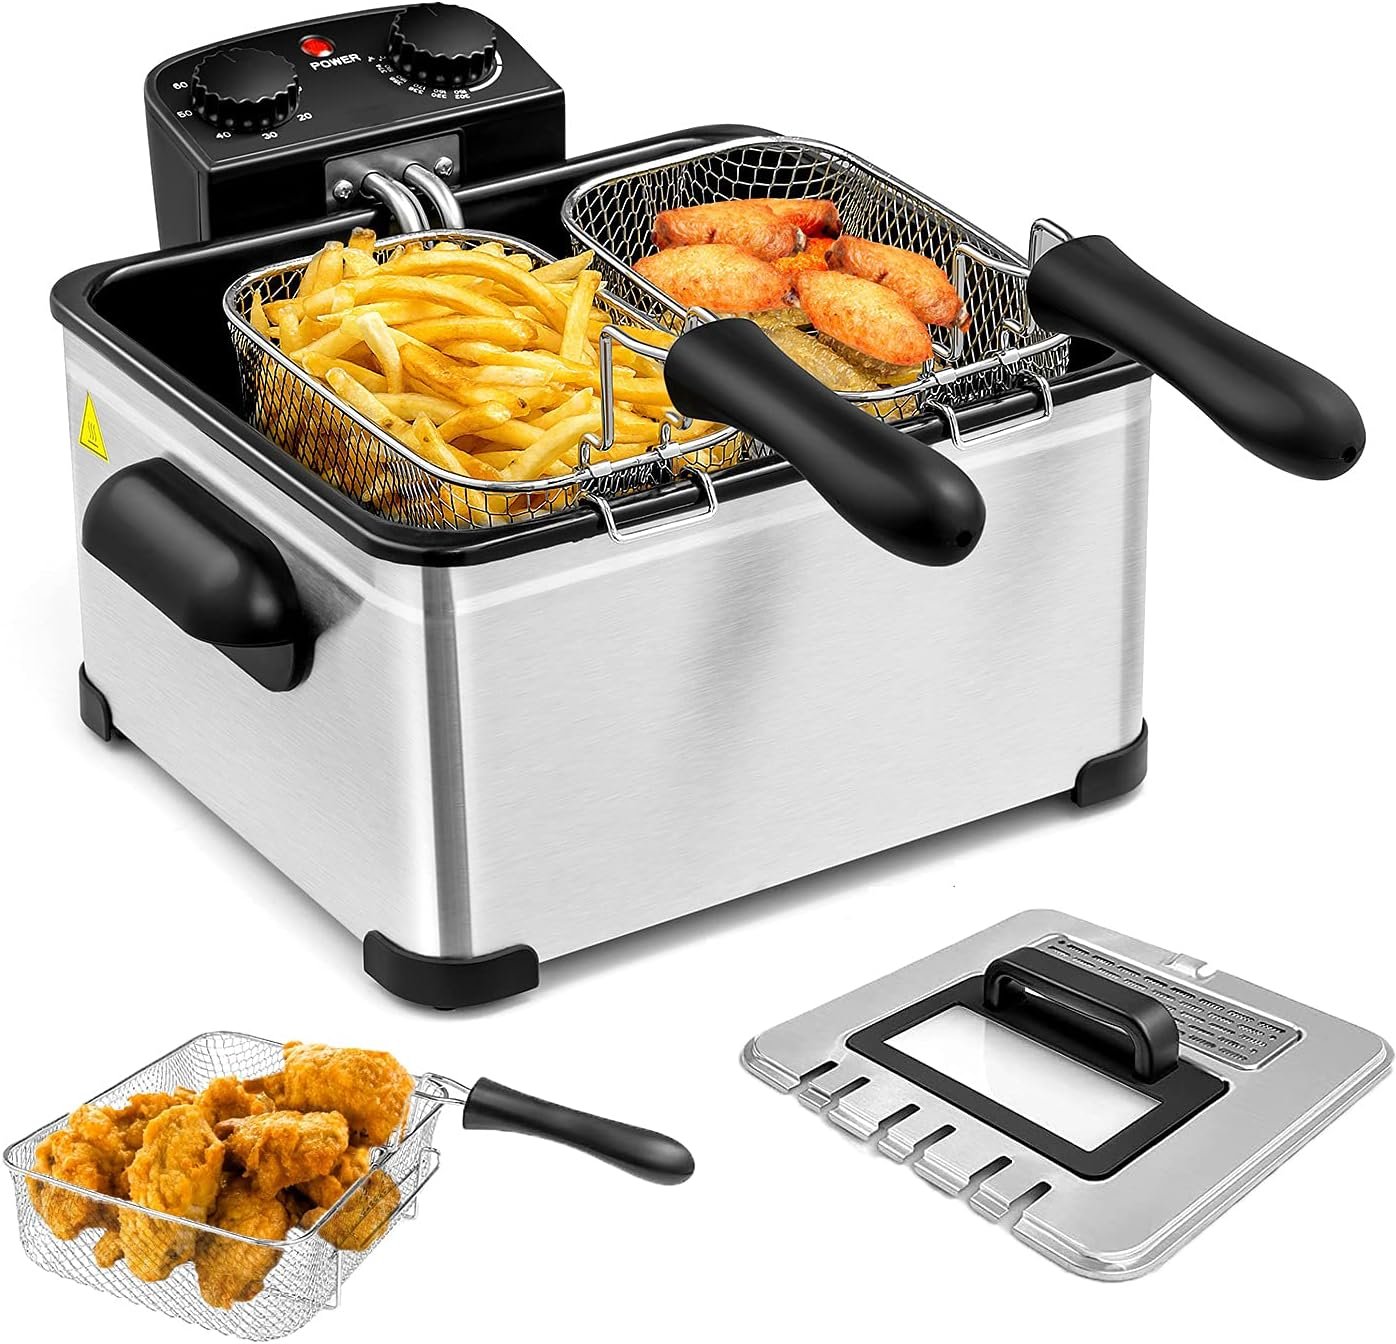 Simoe Deep Fryer with 3 Baskets, 1700W Electric Deep Fryers, 5.3QT/5L Countertop Home Fryer with Adjustable Temperature, Timer, Lid w/View Window, Drip Hook for Home Kitchen, Stainless Steel (5.3QT/21 Cup)